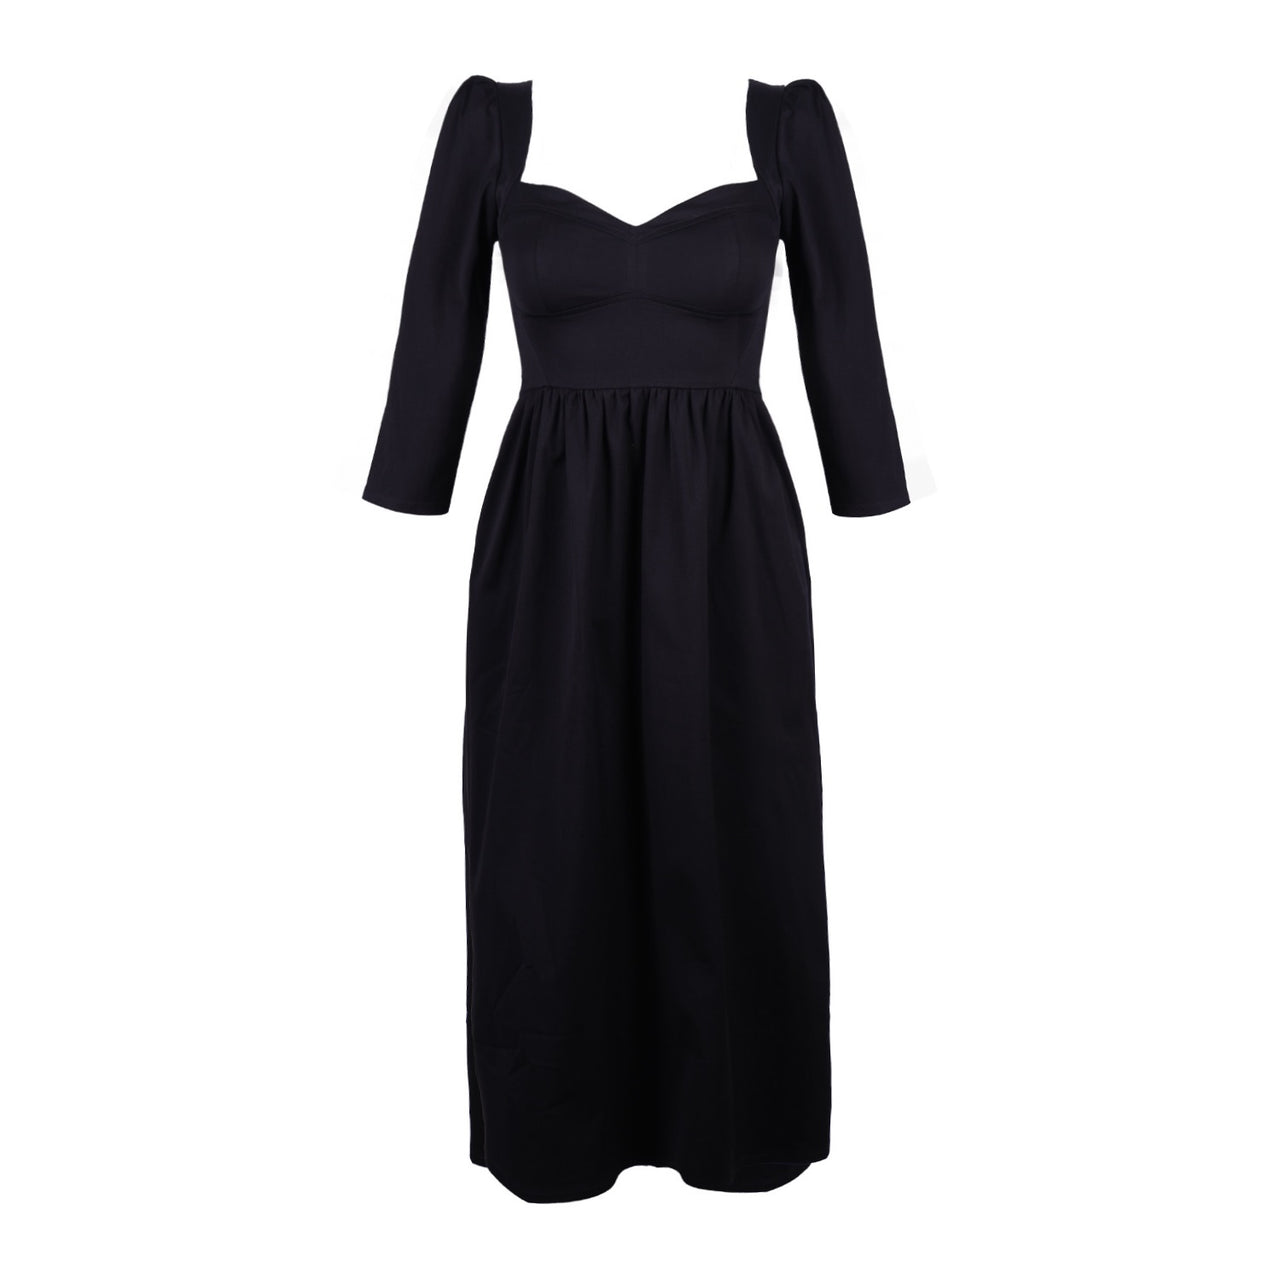 Violet Dress with Sweetheart Neck in Black Cotton